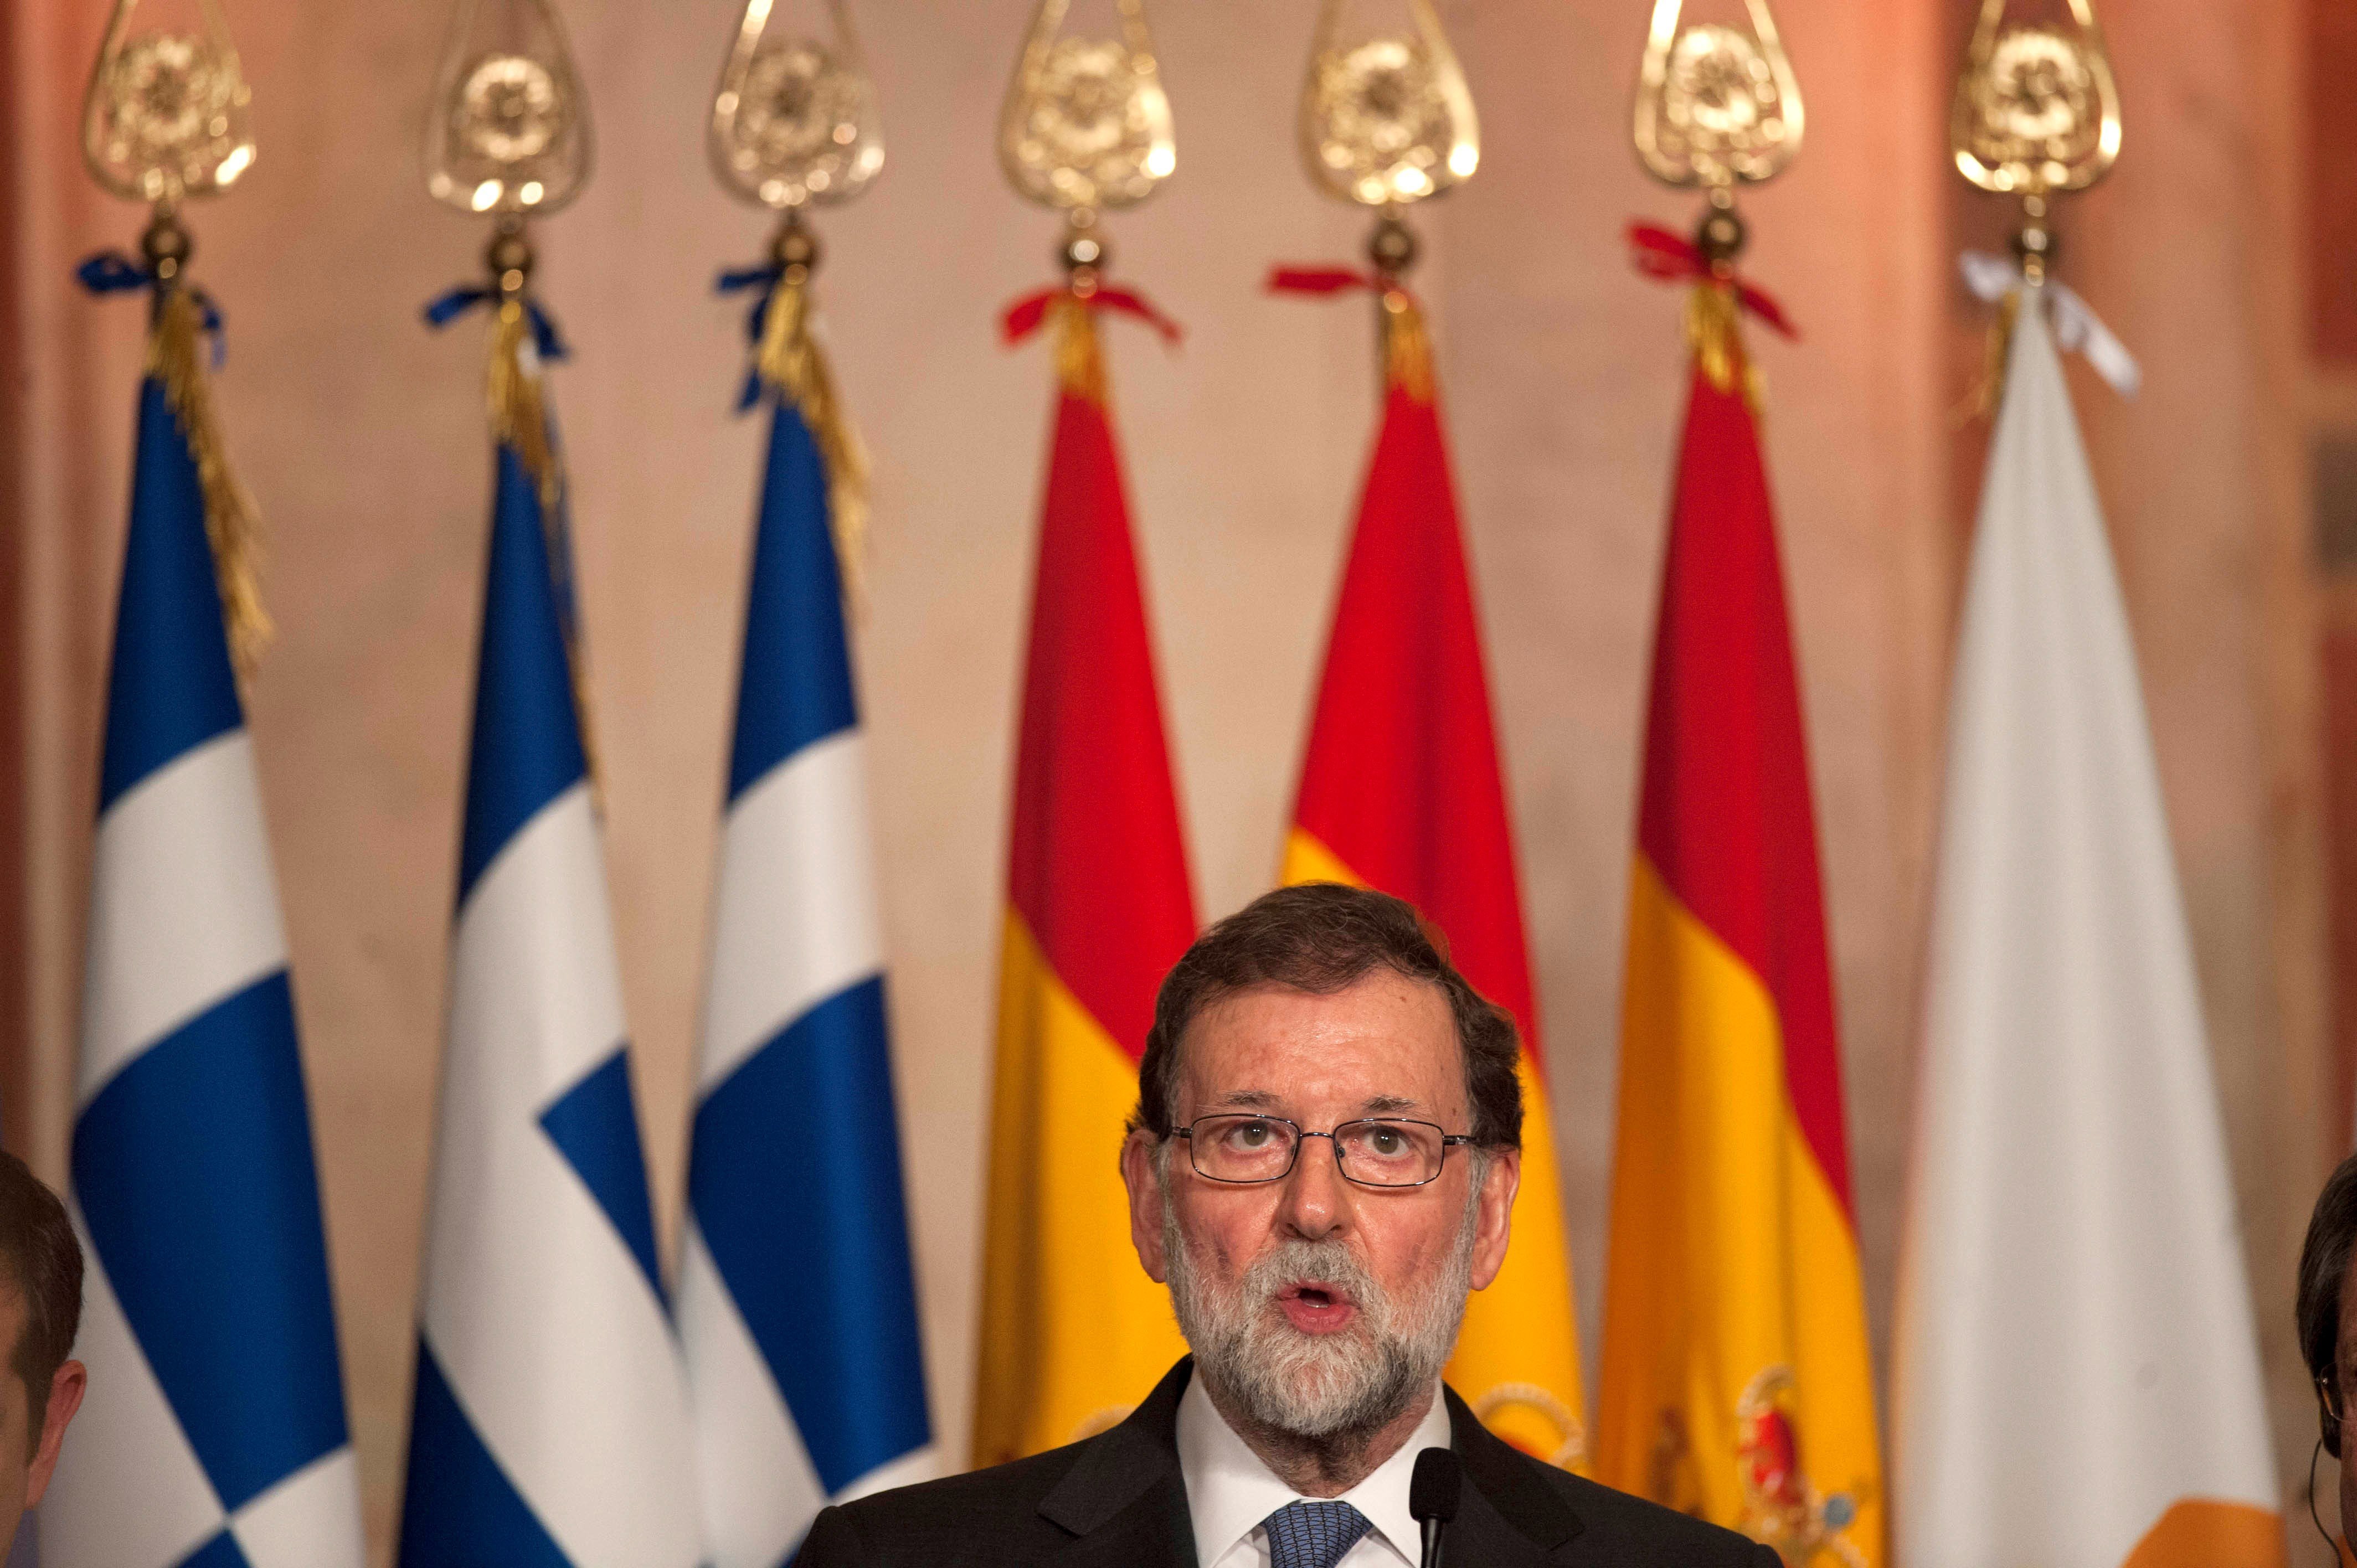 Rajoy losing support among Spanish elite, says Bloomberg